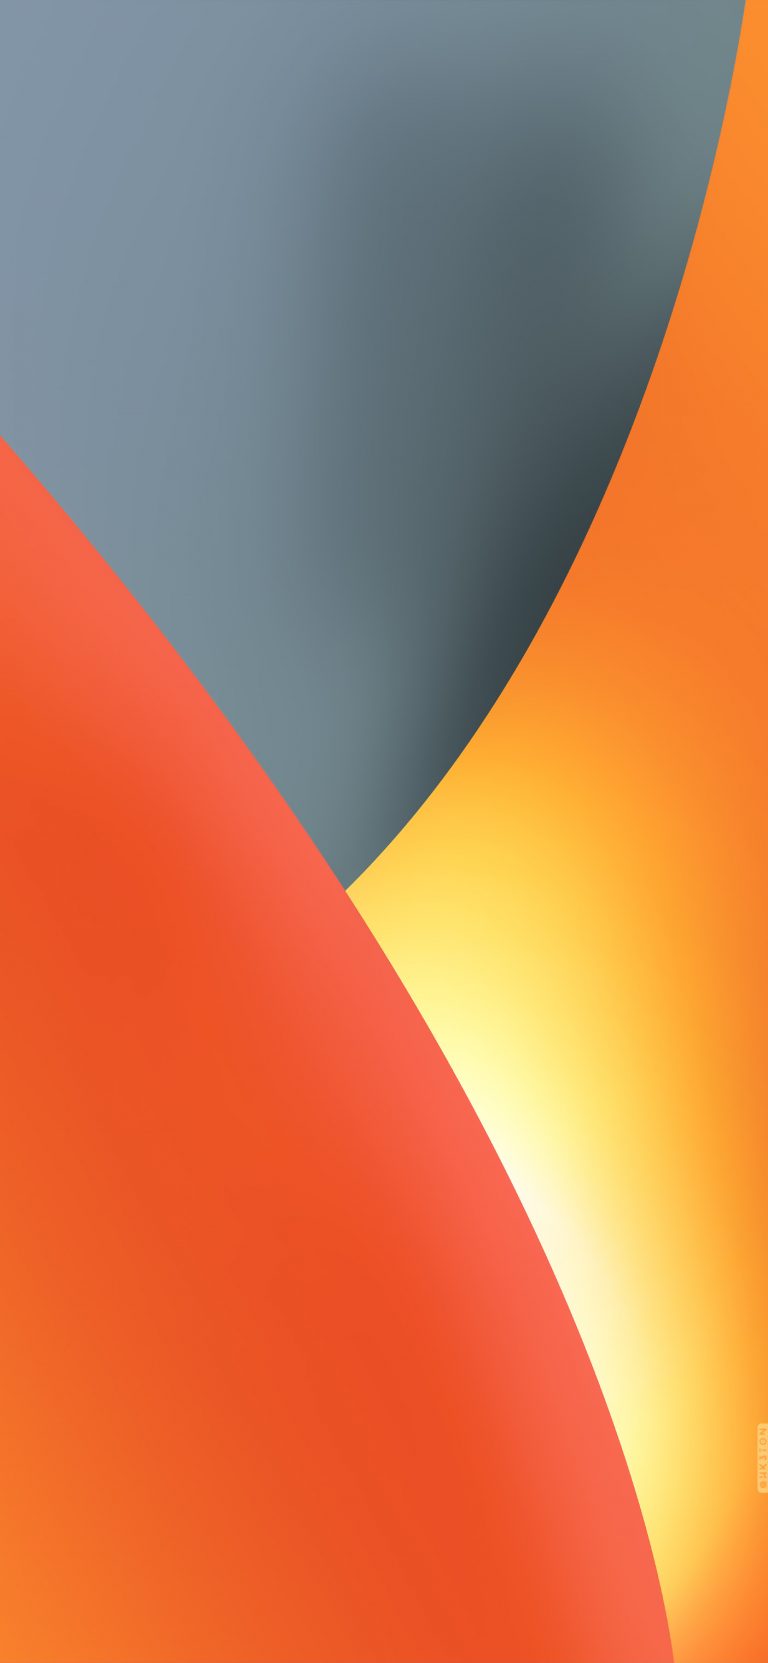 iOS 15.5 – Orange and Gray shapes by Hk3ToN | Zollotech